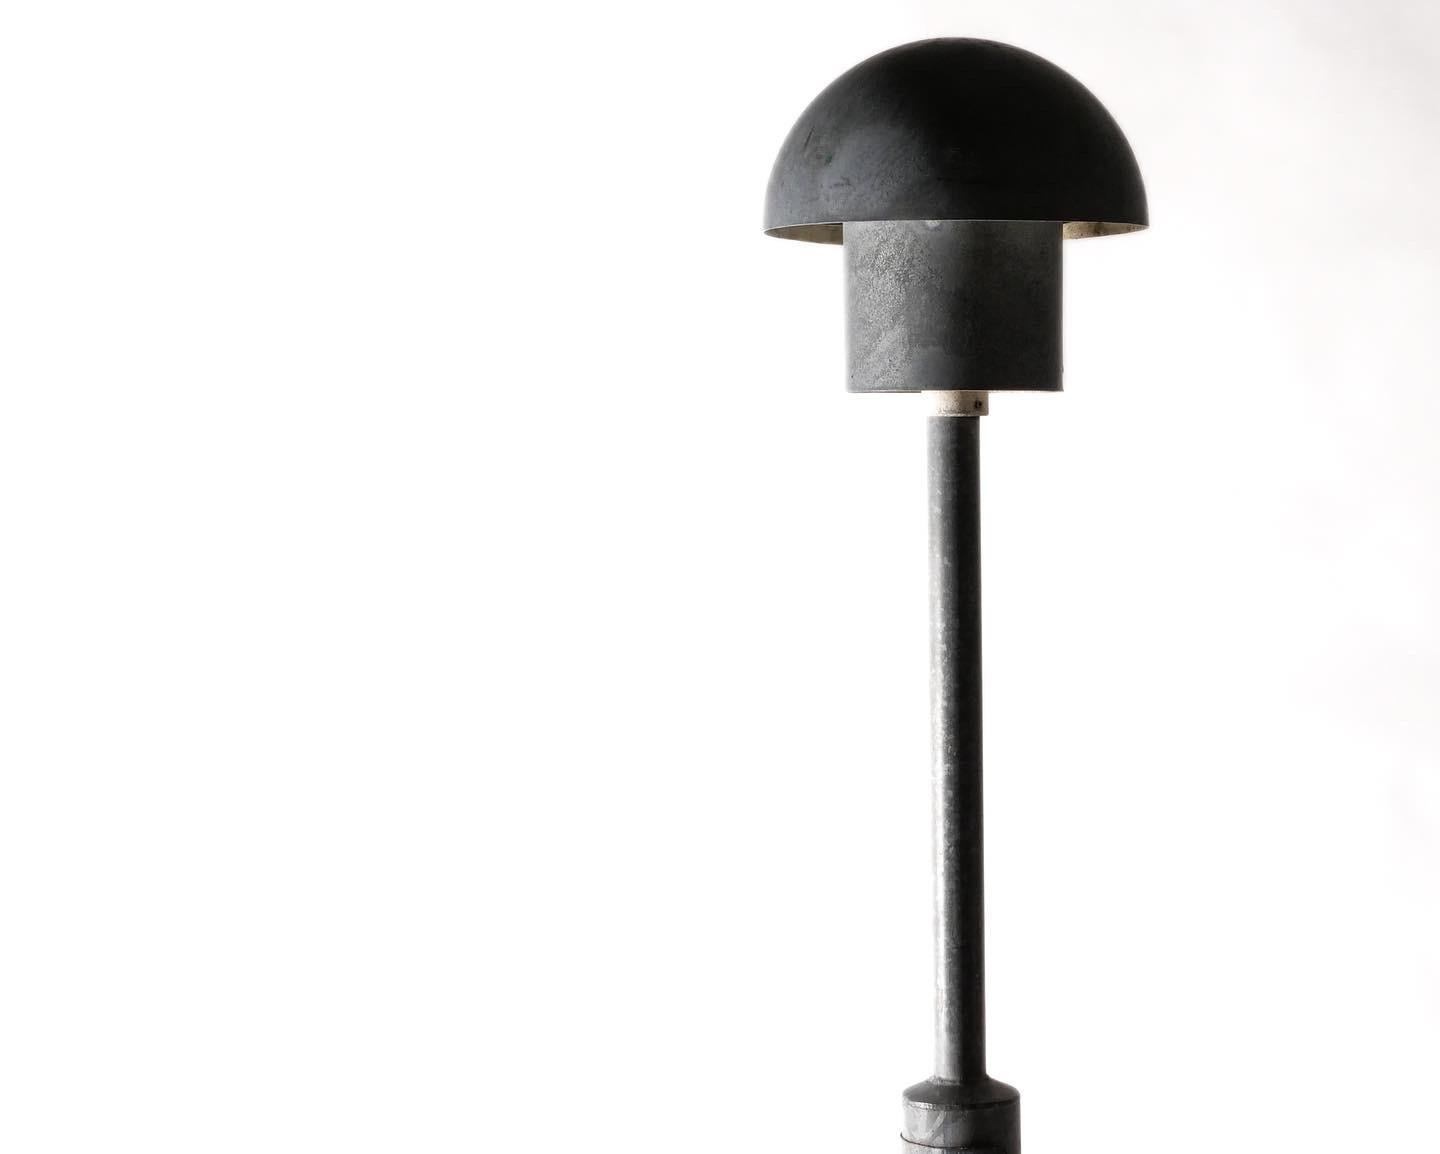 Four available. Large-scale in-ground lamps with original posts by Bjarne Bech for Louis Poulsen. Fantastic mushroom form shades diffuse light downward for excellent pathway illumination and overall ambient light. Will require hardwiring. Posts are